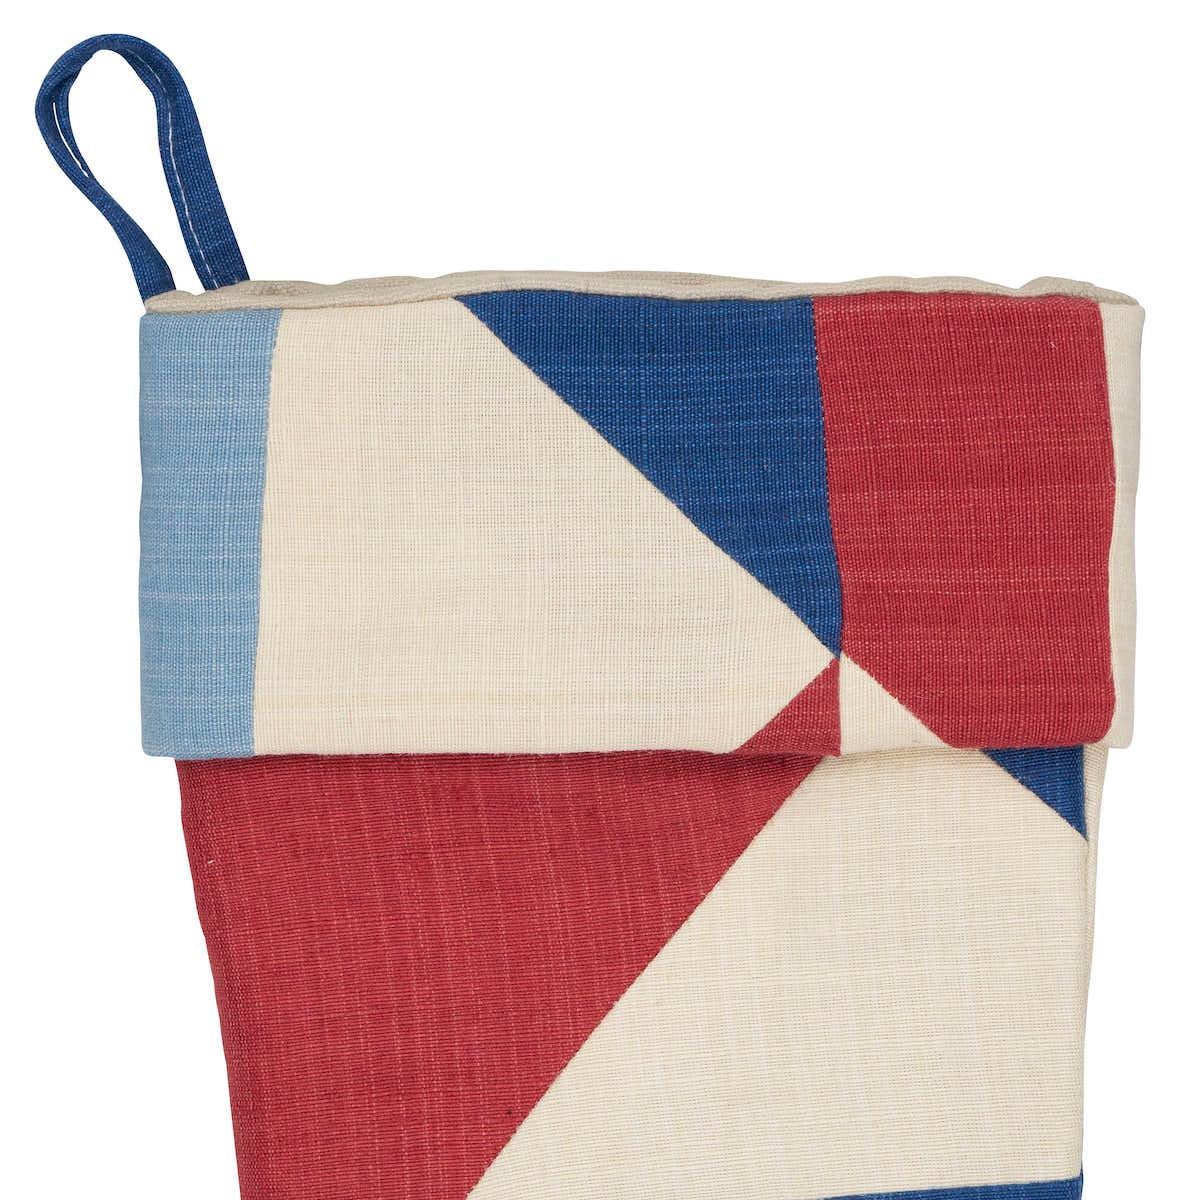 *Pre-order, available to ship in October.

Fashioned from the striking patchwork of Schumacher’s Erindale pattern, this limited-edition holiday stocking is a festive combination of modern and rustic. Made of hand-dyed cotton and jute, the cheerful